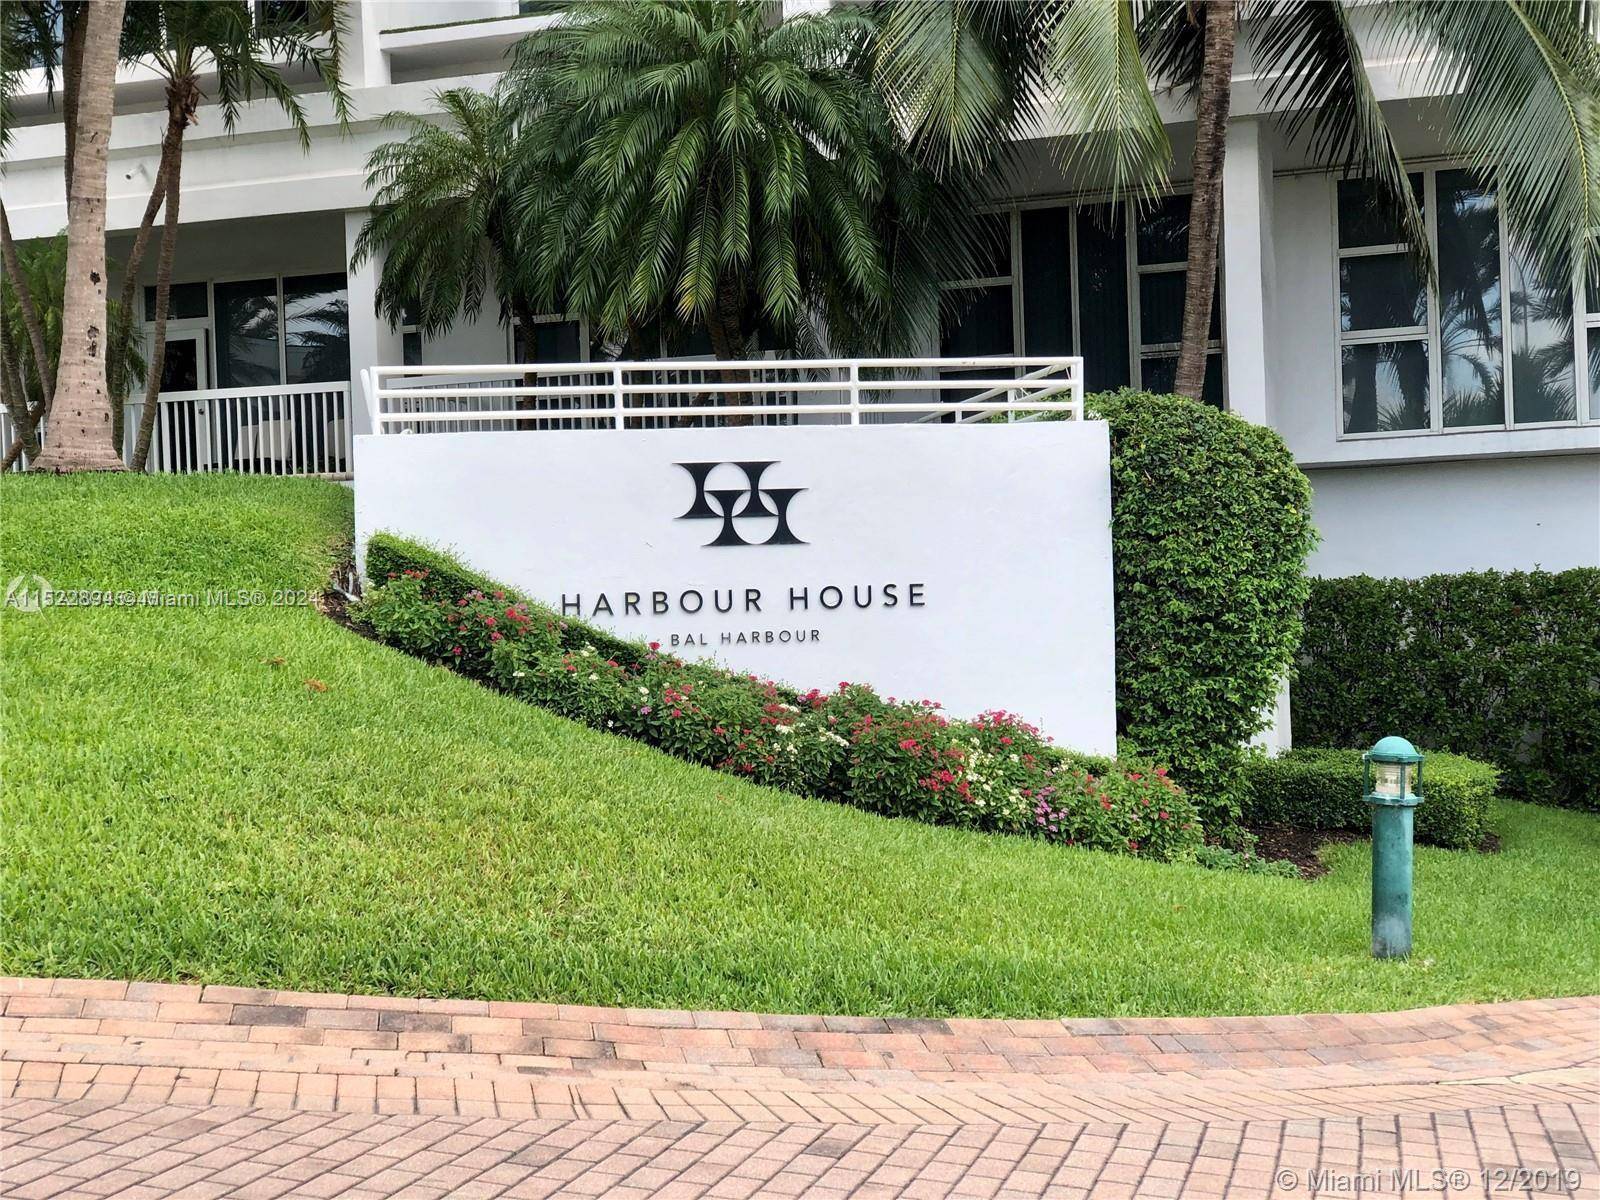 Beautiful 2 bedrooms and 2 bathrooms located in Harbour House.